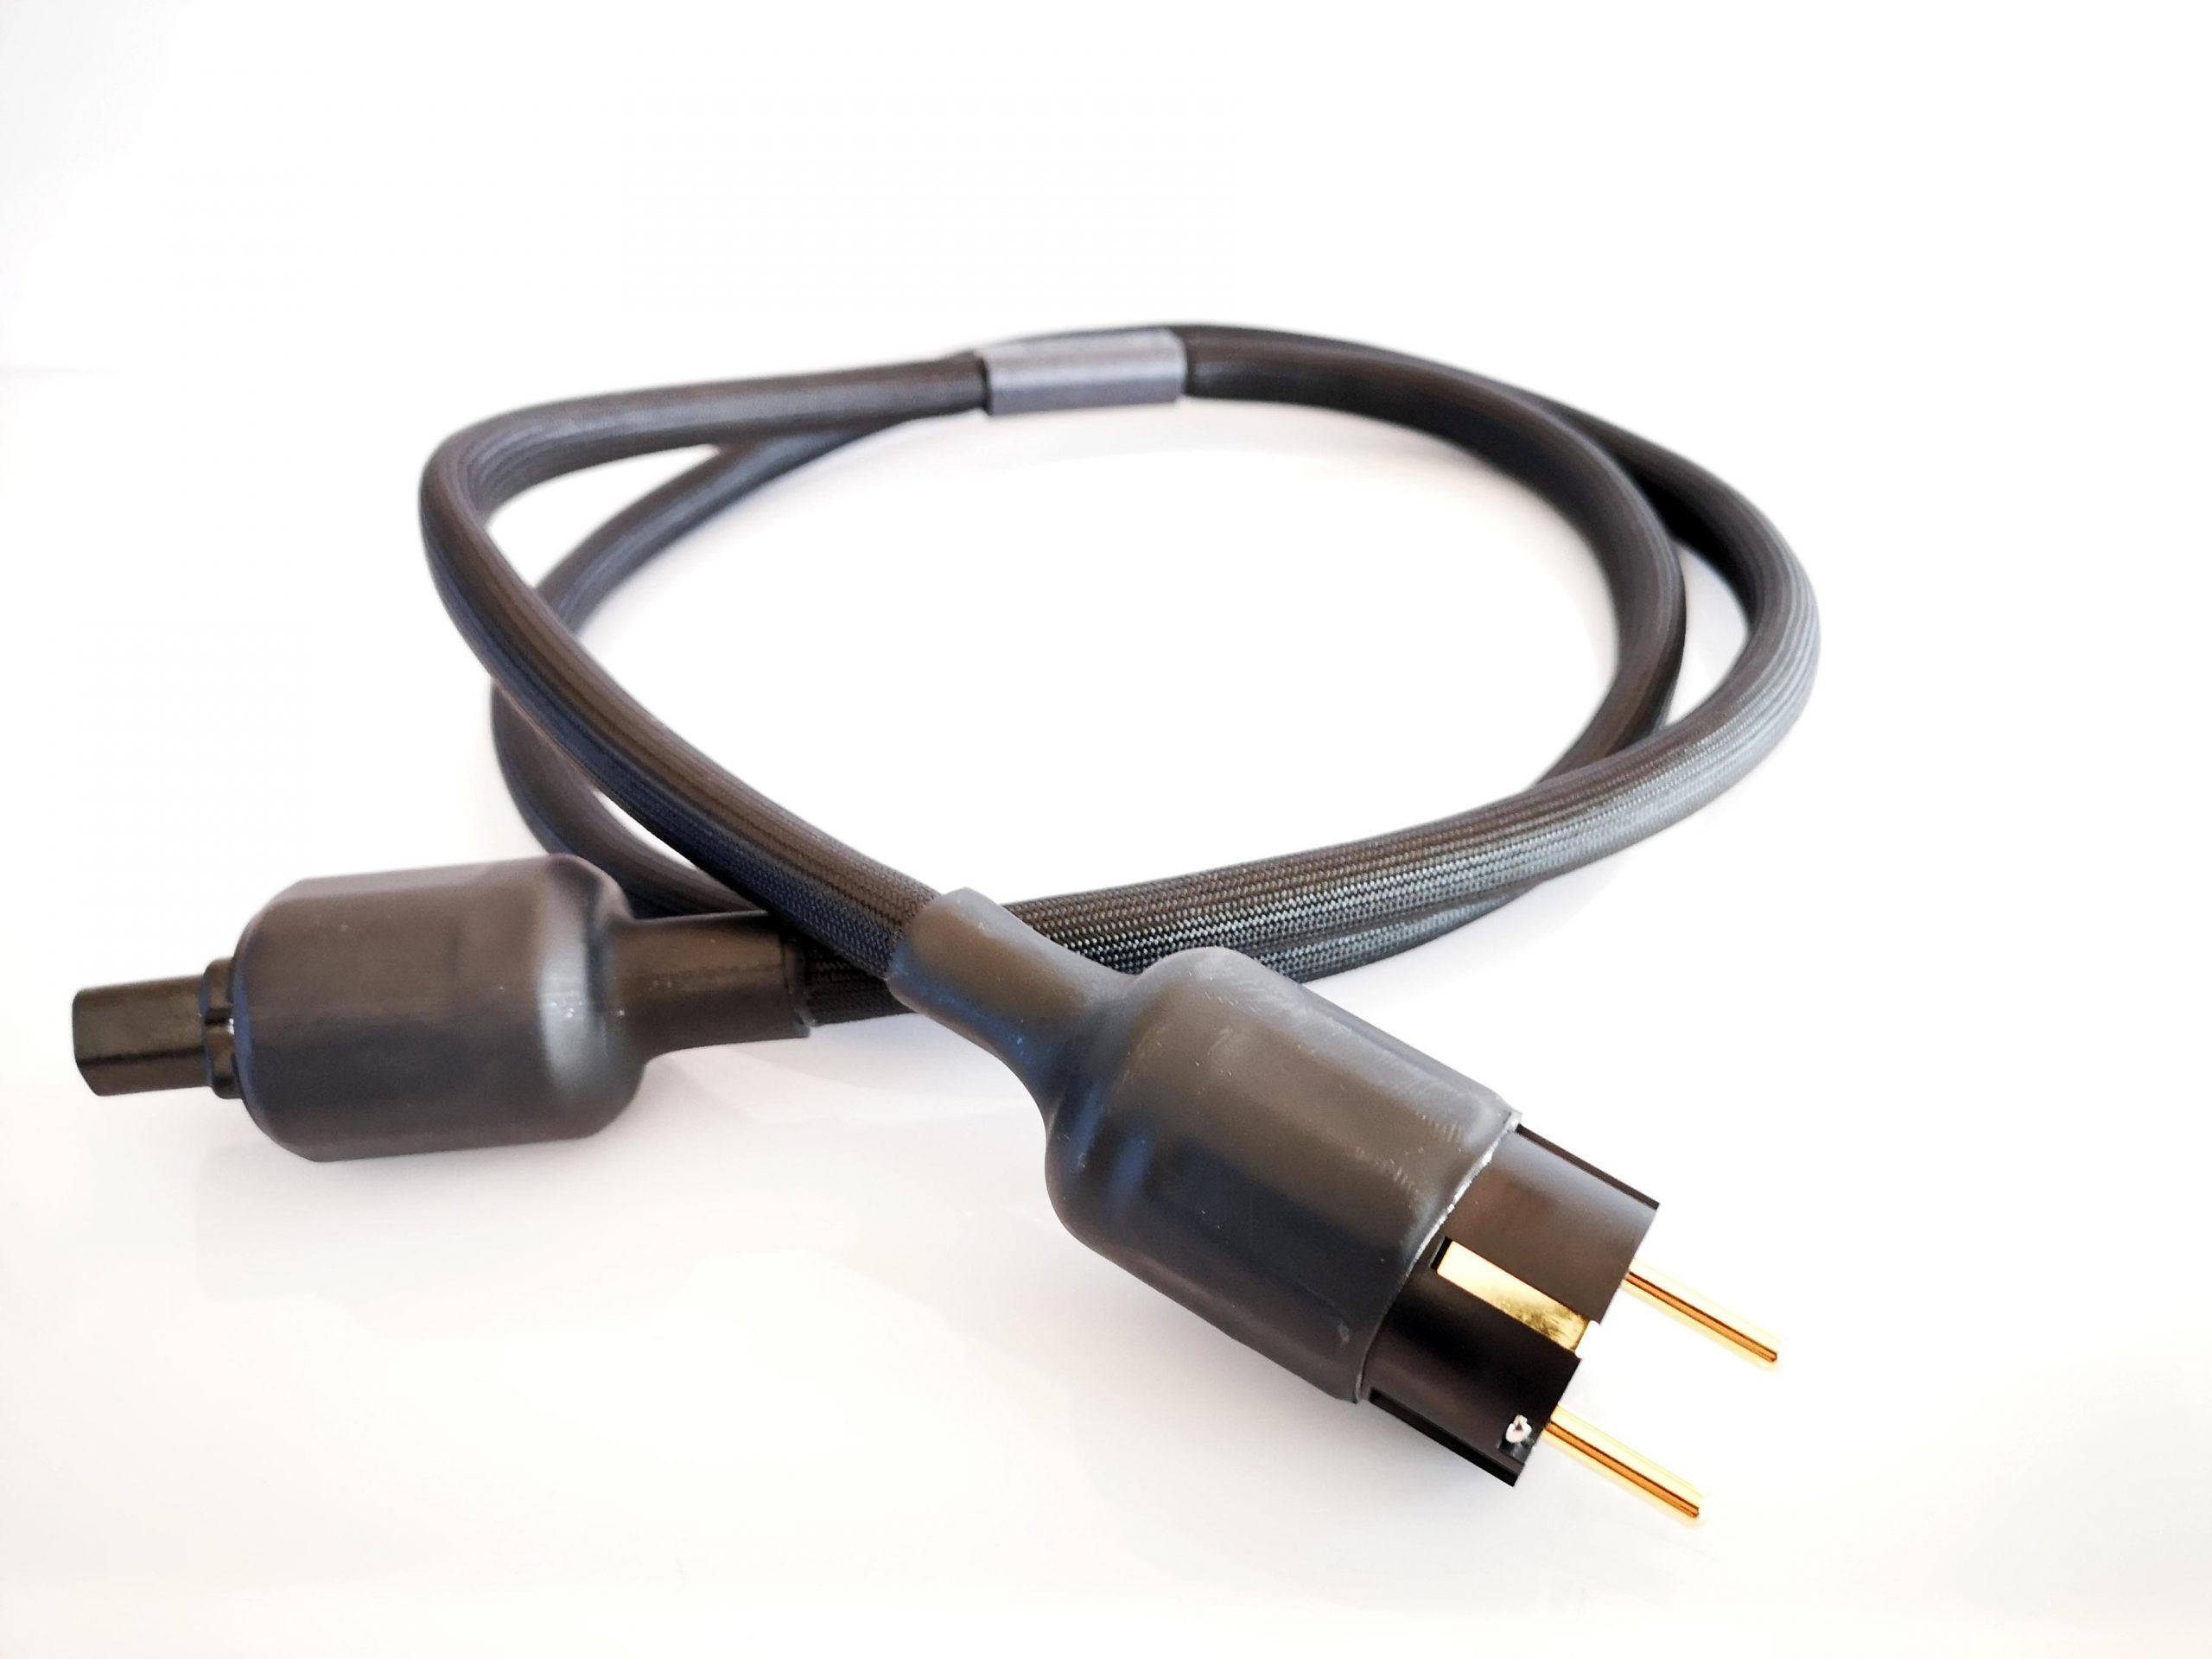 Omicron secteur schuko power odeion cables